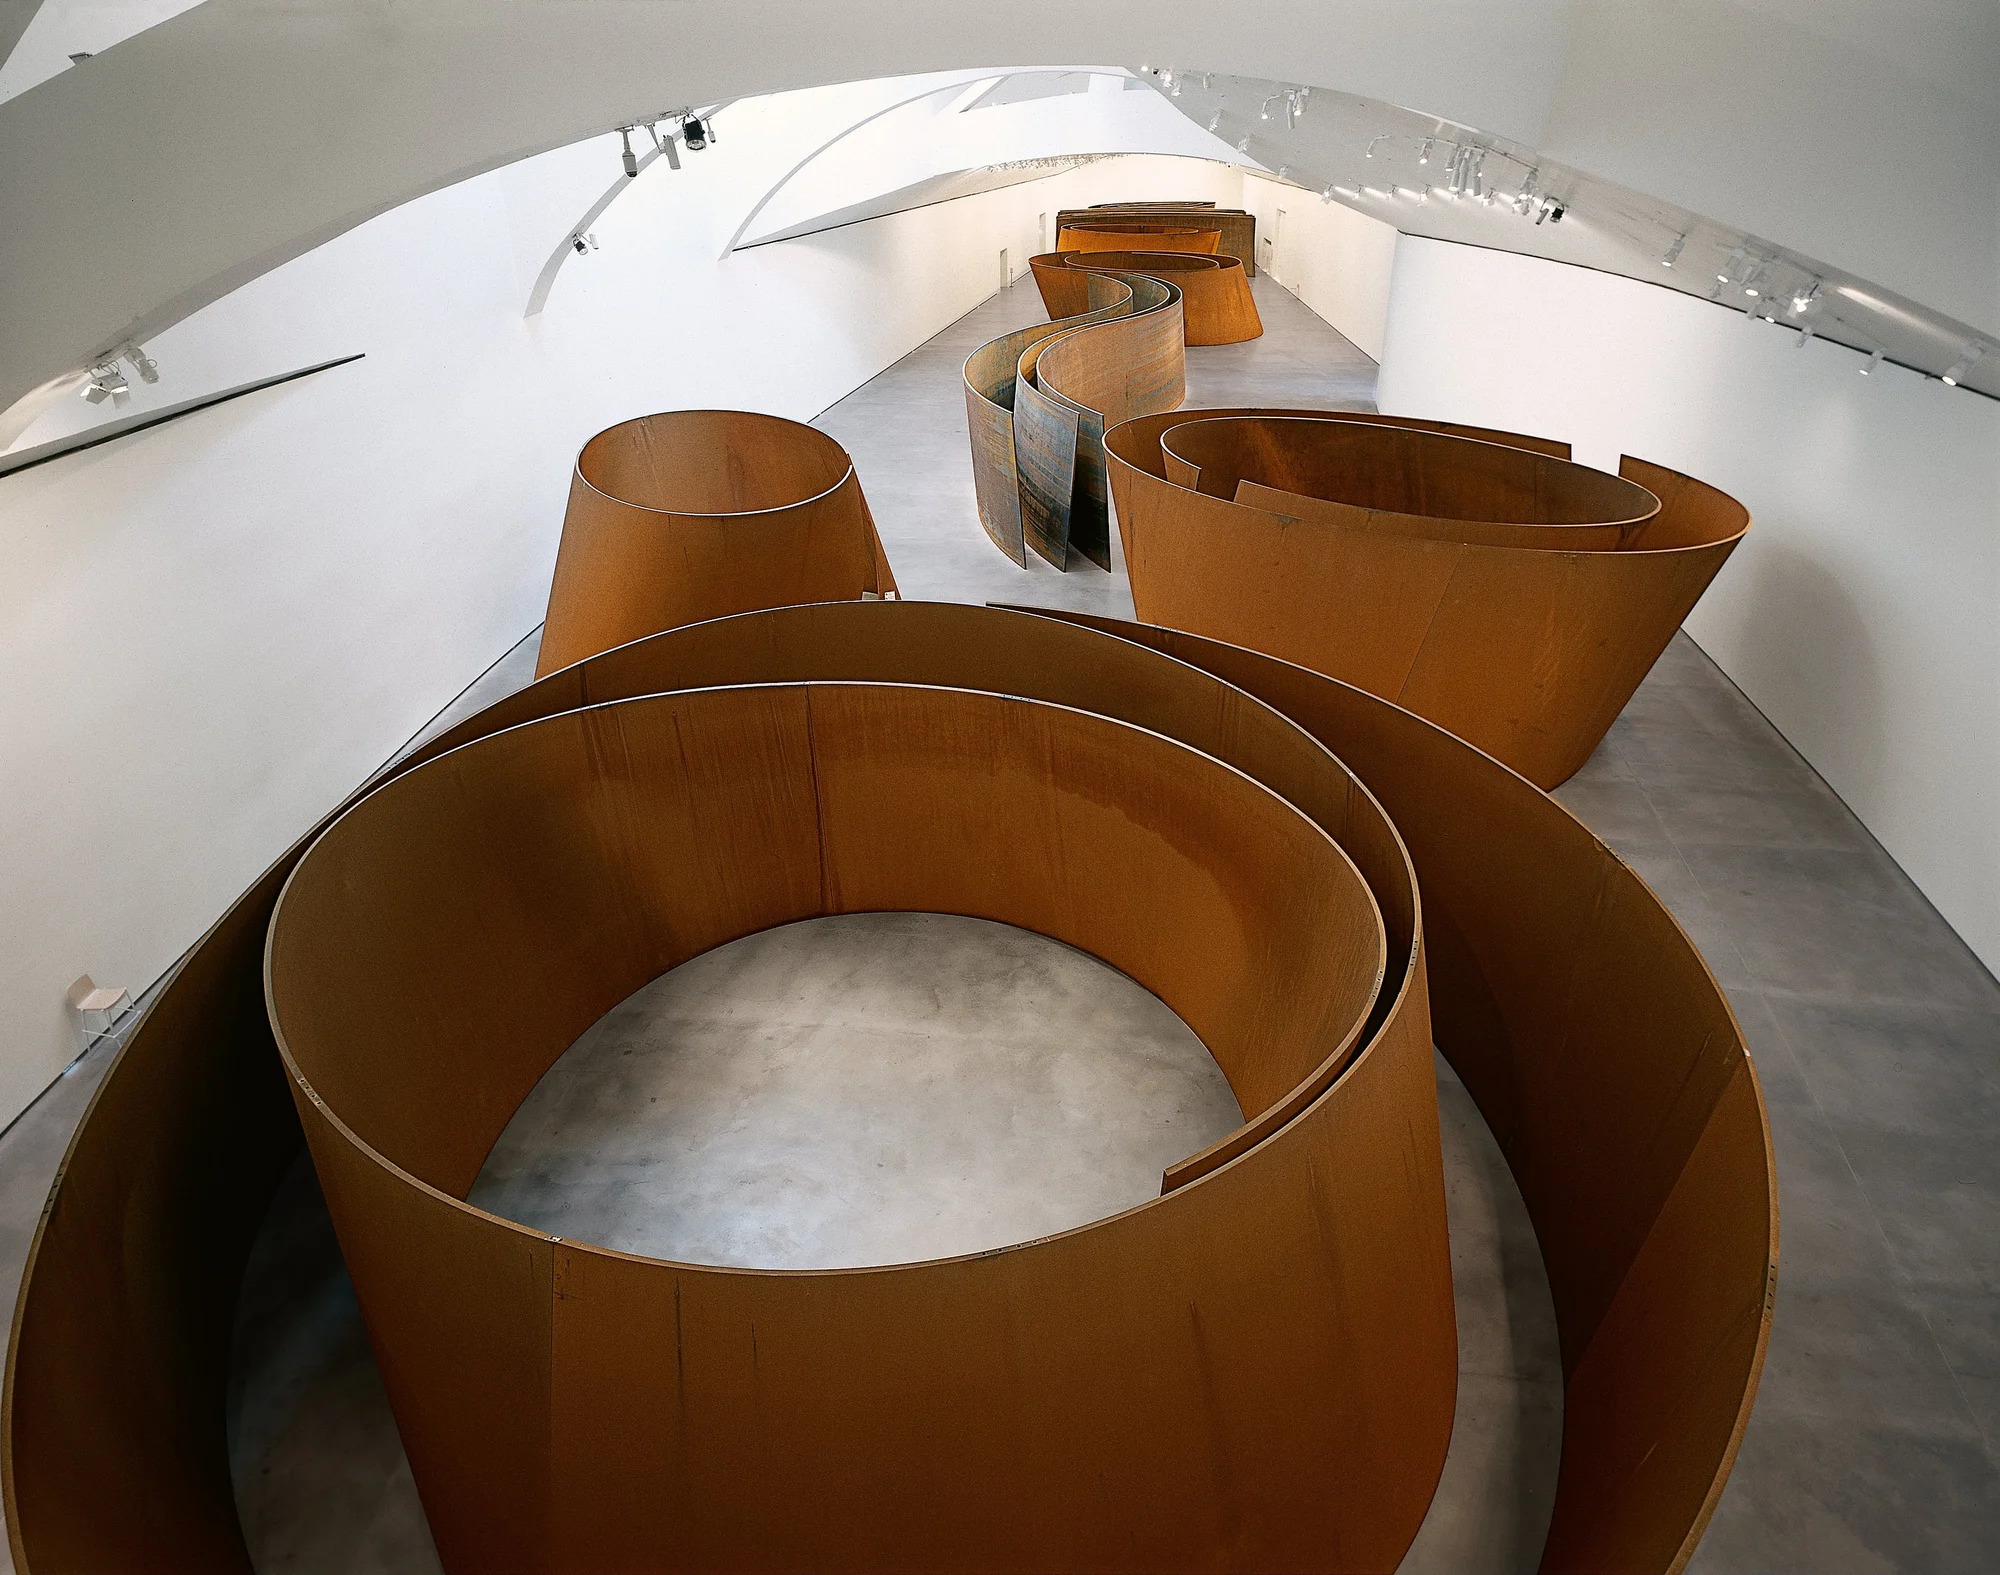 Giant sculpture of curved steel plates covering the entire space of a room. The photograph has a zenithal perspective, so we see the top of the sculptures.